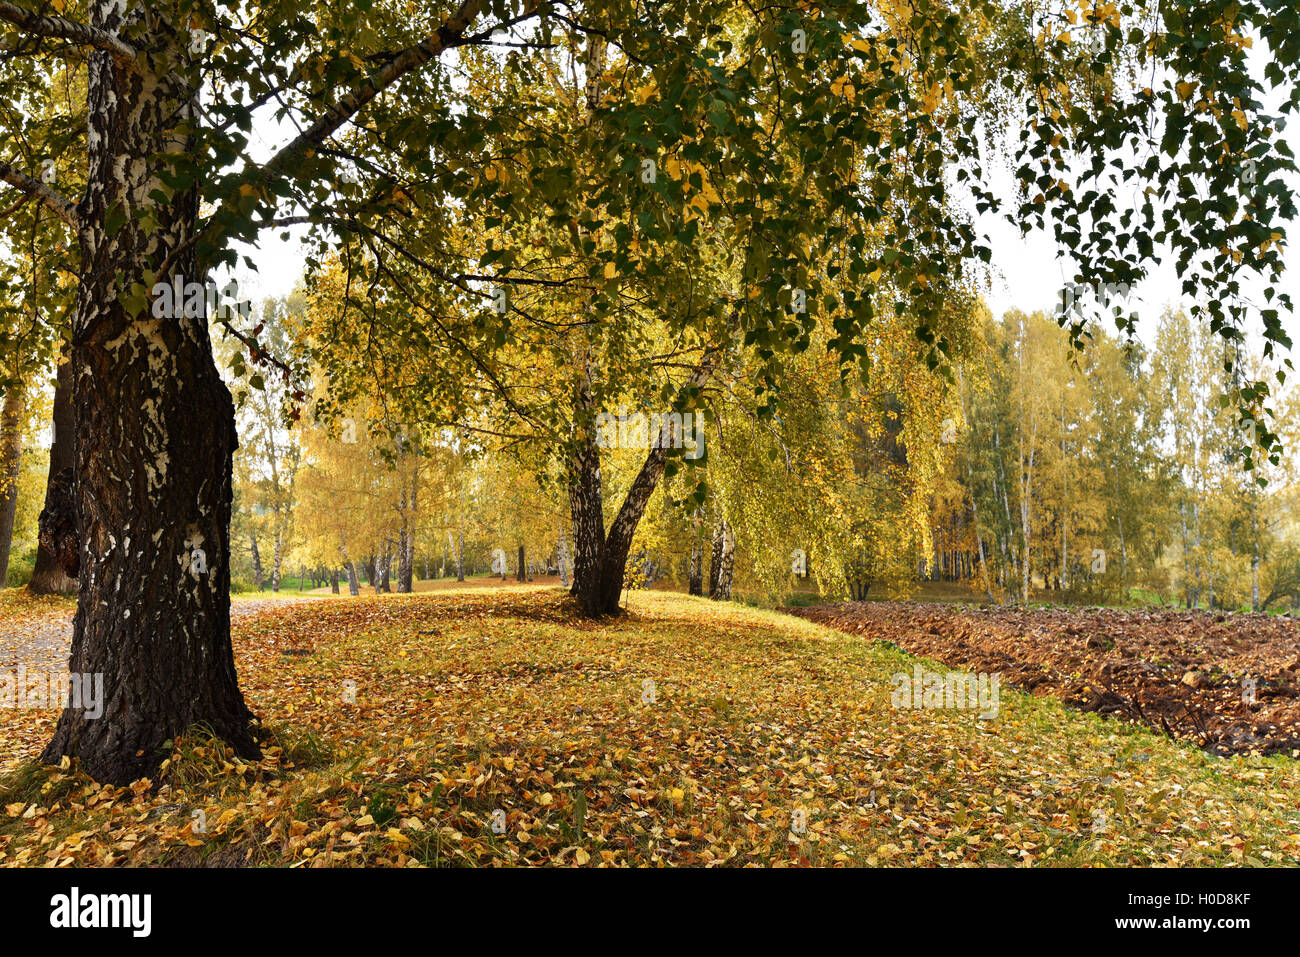 Birch grove with yellow leaves in cloudy autumn day Stock Photo